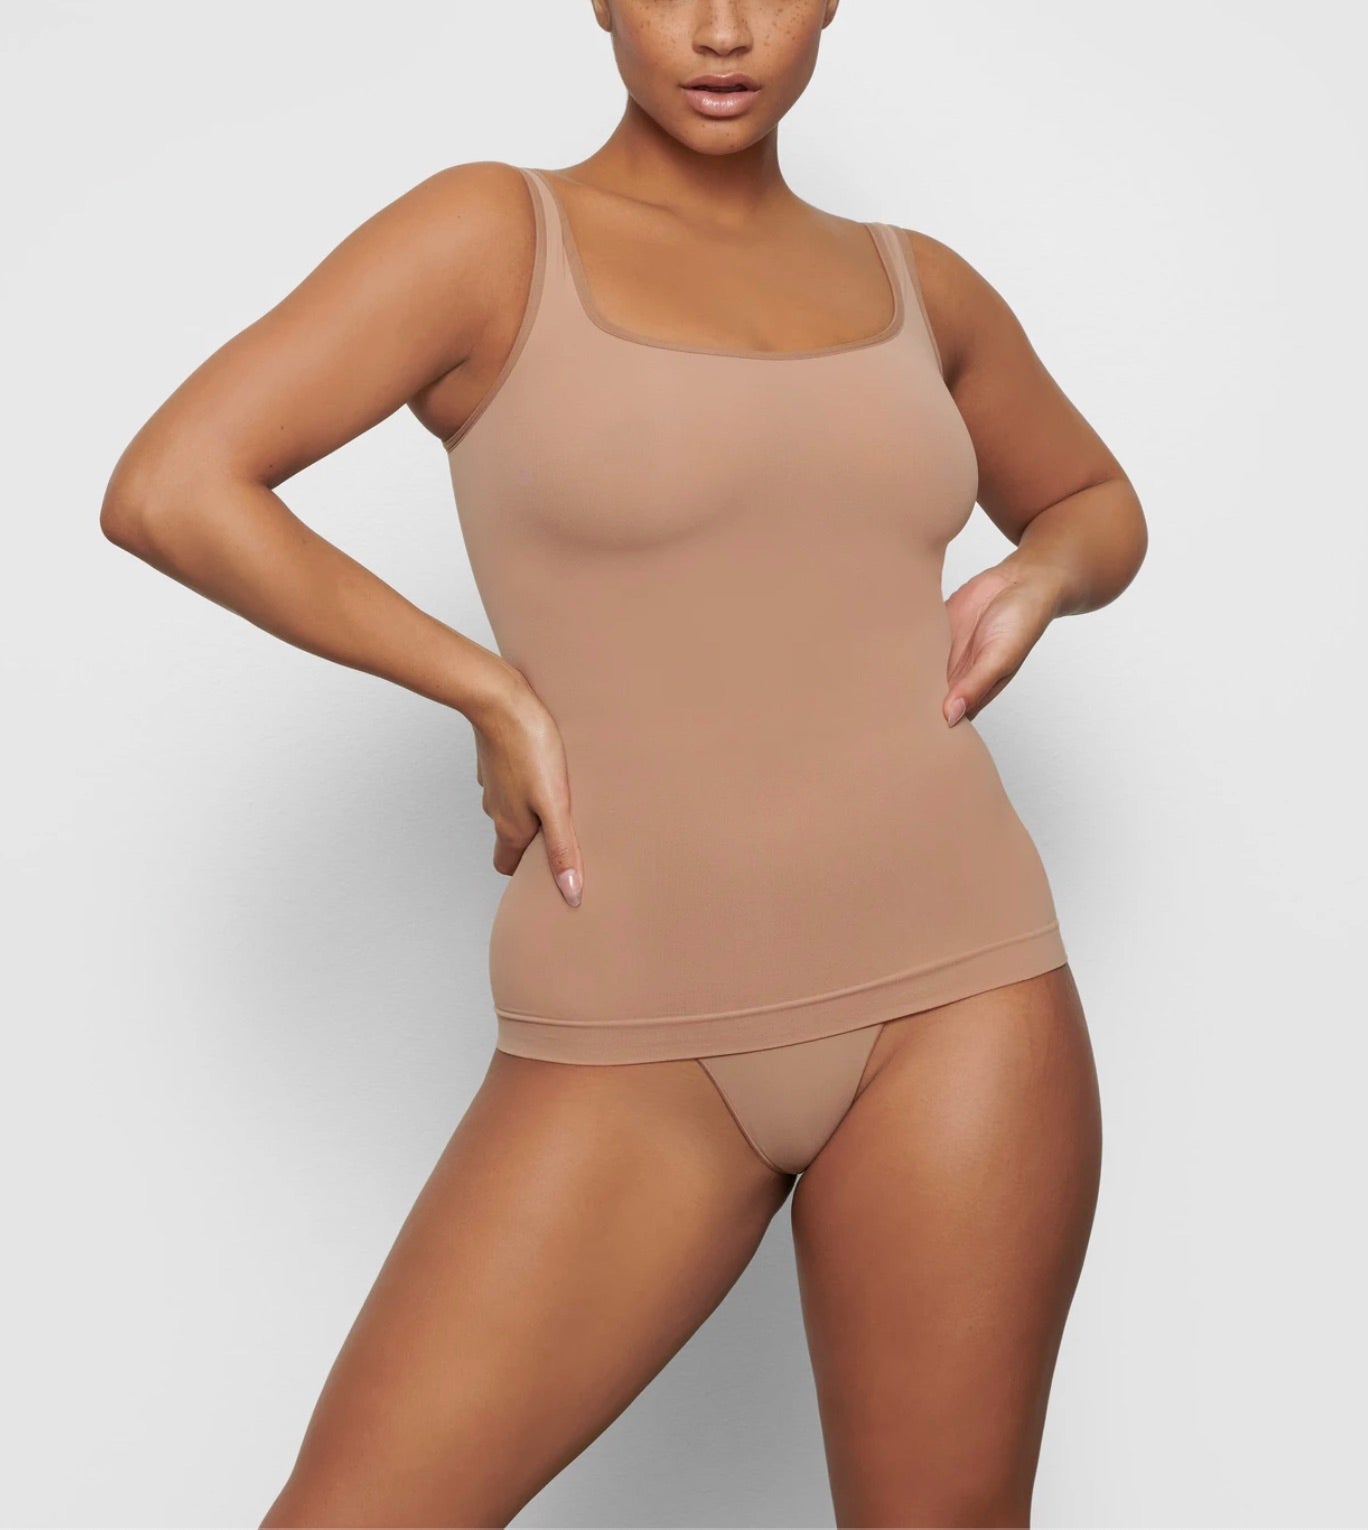 Kim Kardashian - Shop the SKIMS Solutionwear™ restock now at SKIMS.COM! I'm  wearing the Sculpting Bra and Sculpting Short Above the Knee in Clay.🖤